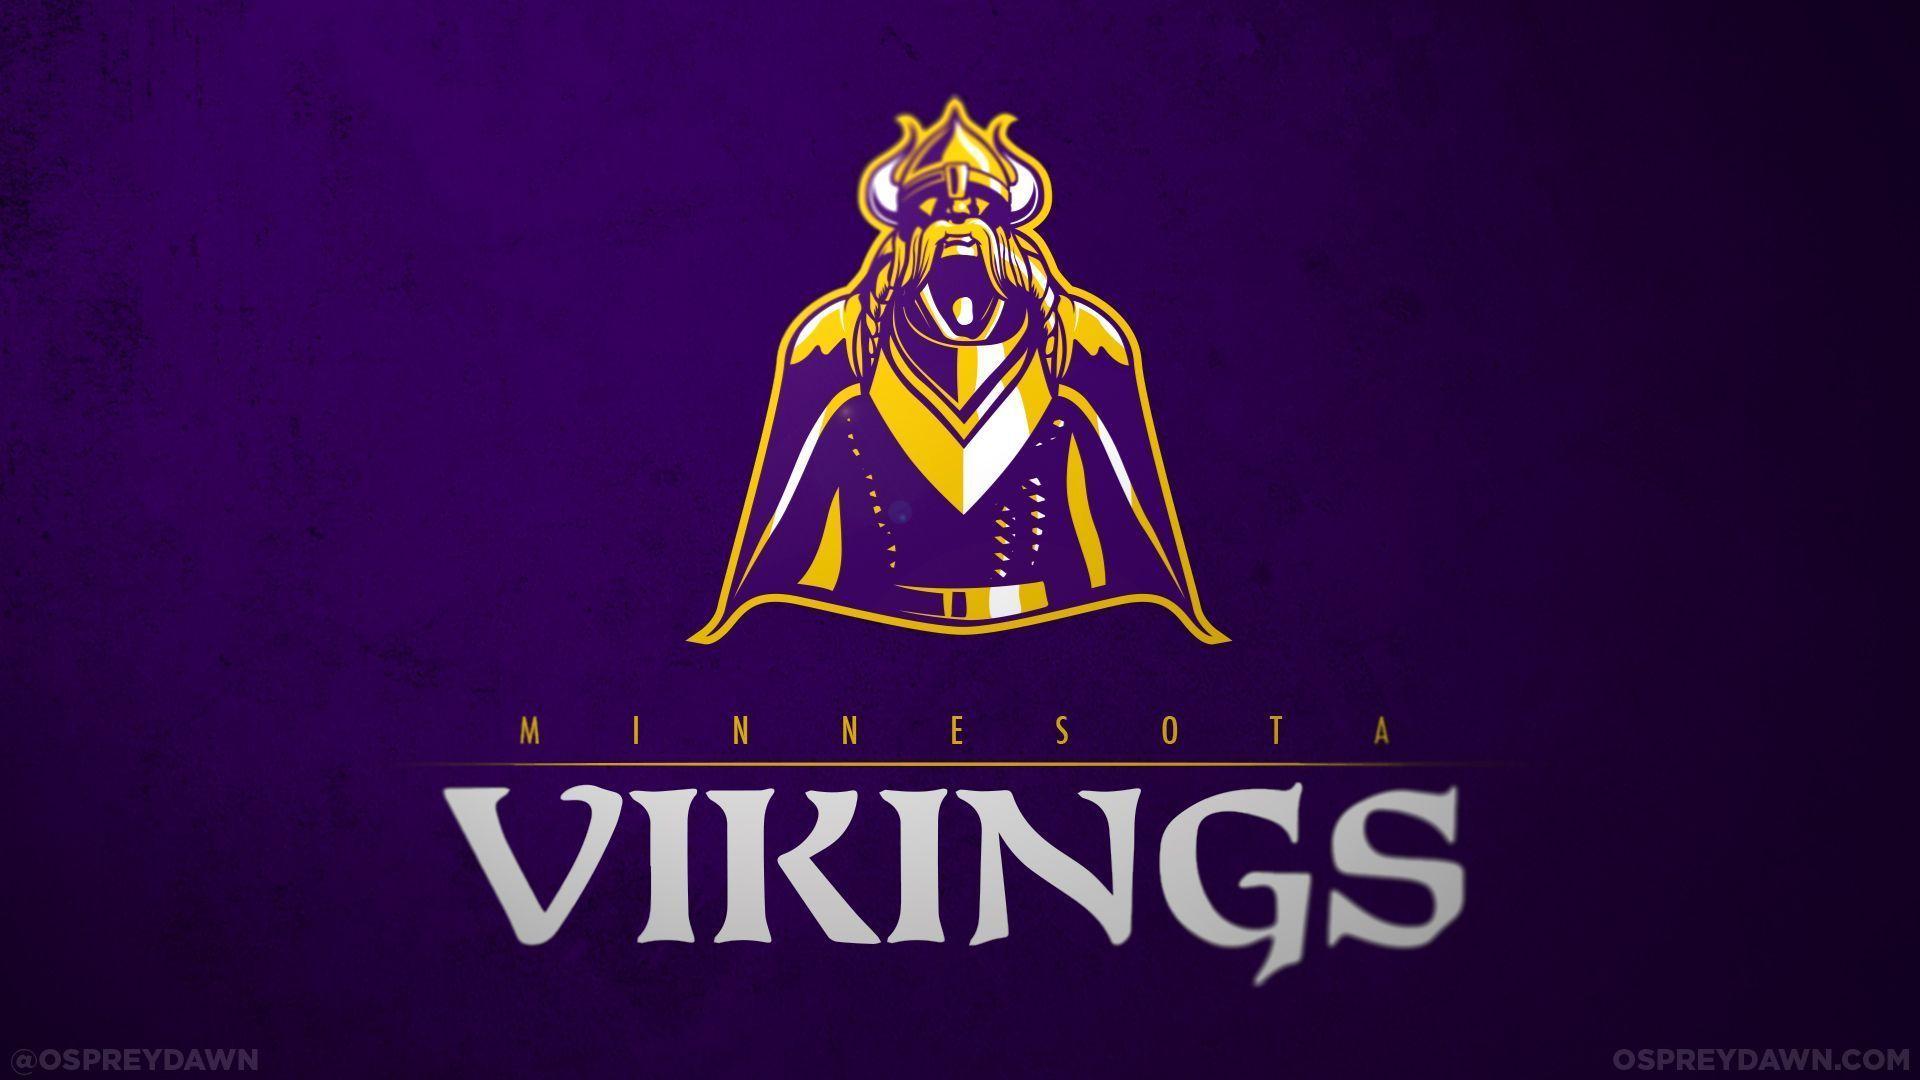 You can view, download and comment on Vikings Wallpaper free HD 1920